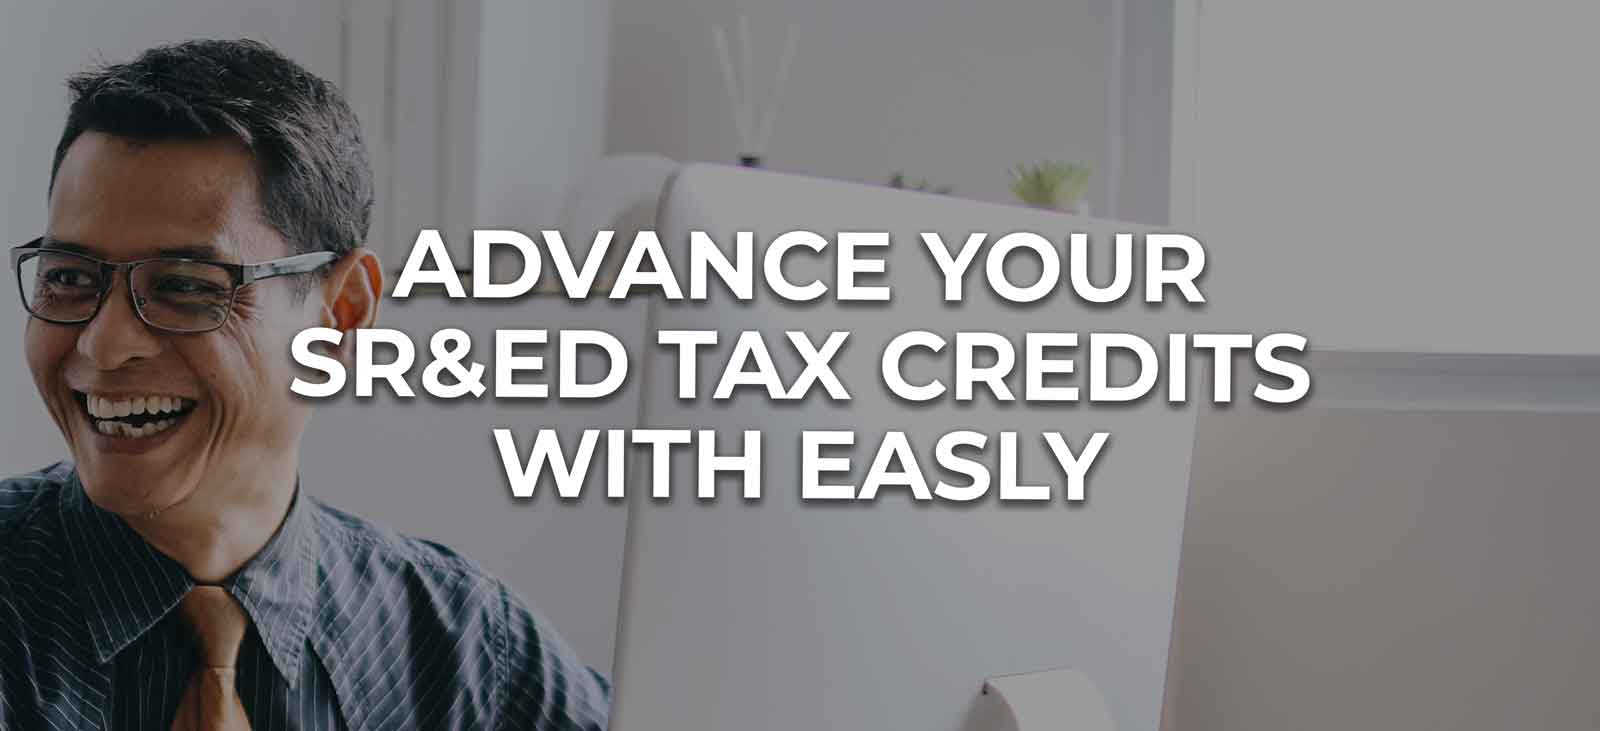 Advance Your SR&ED Tax Credits with Easly